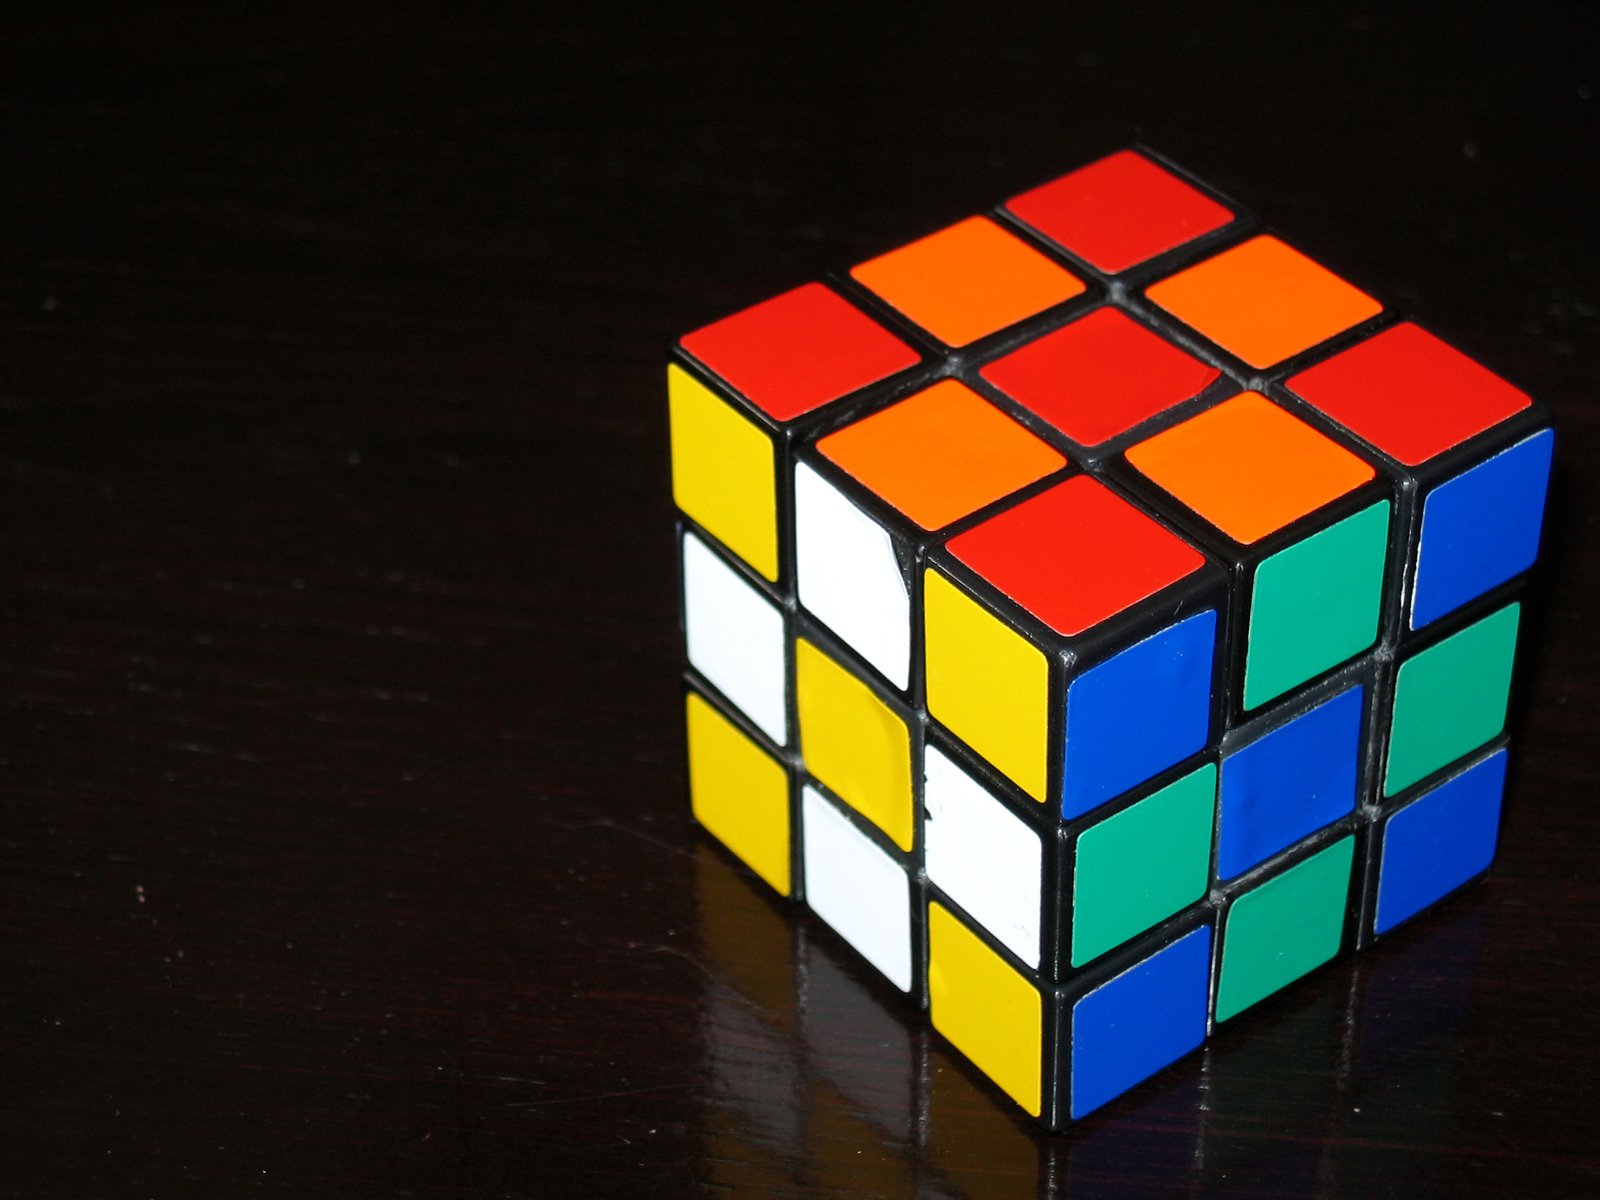 colorful cube on a black surface with one cube missing